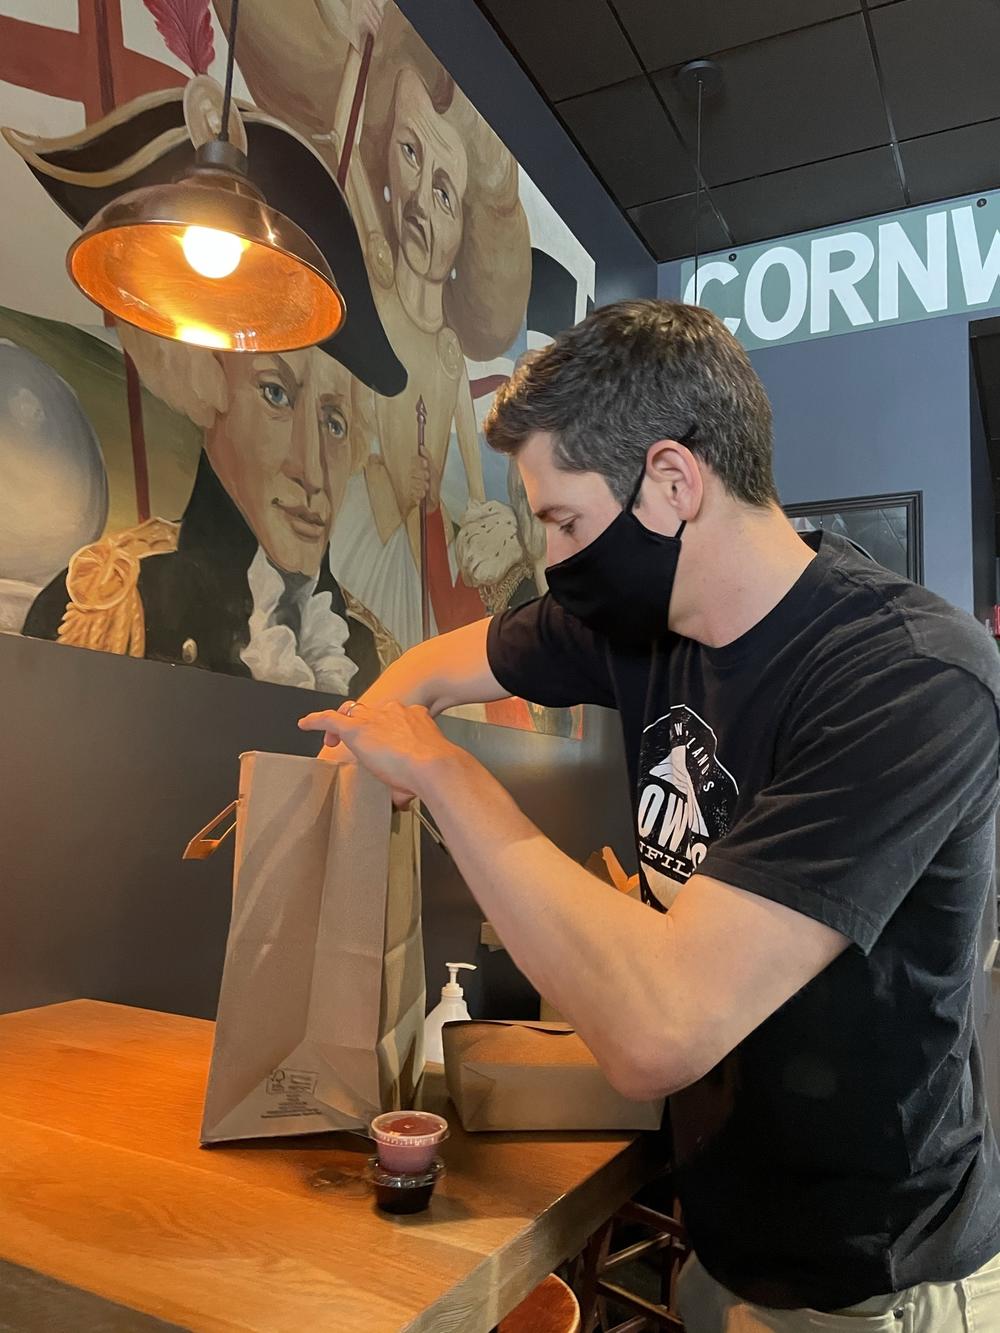 As part of Cornwall's skeletal staff, General manager Billy Moran does everything from bartending to cooking and delivering take-out. The restaurant is adding more staff now, hoping that business will pick up this spring.